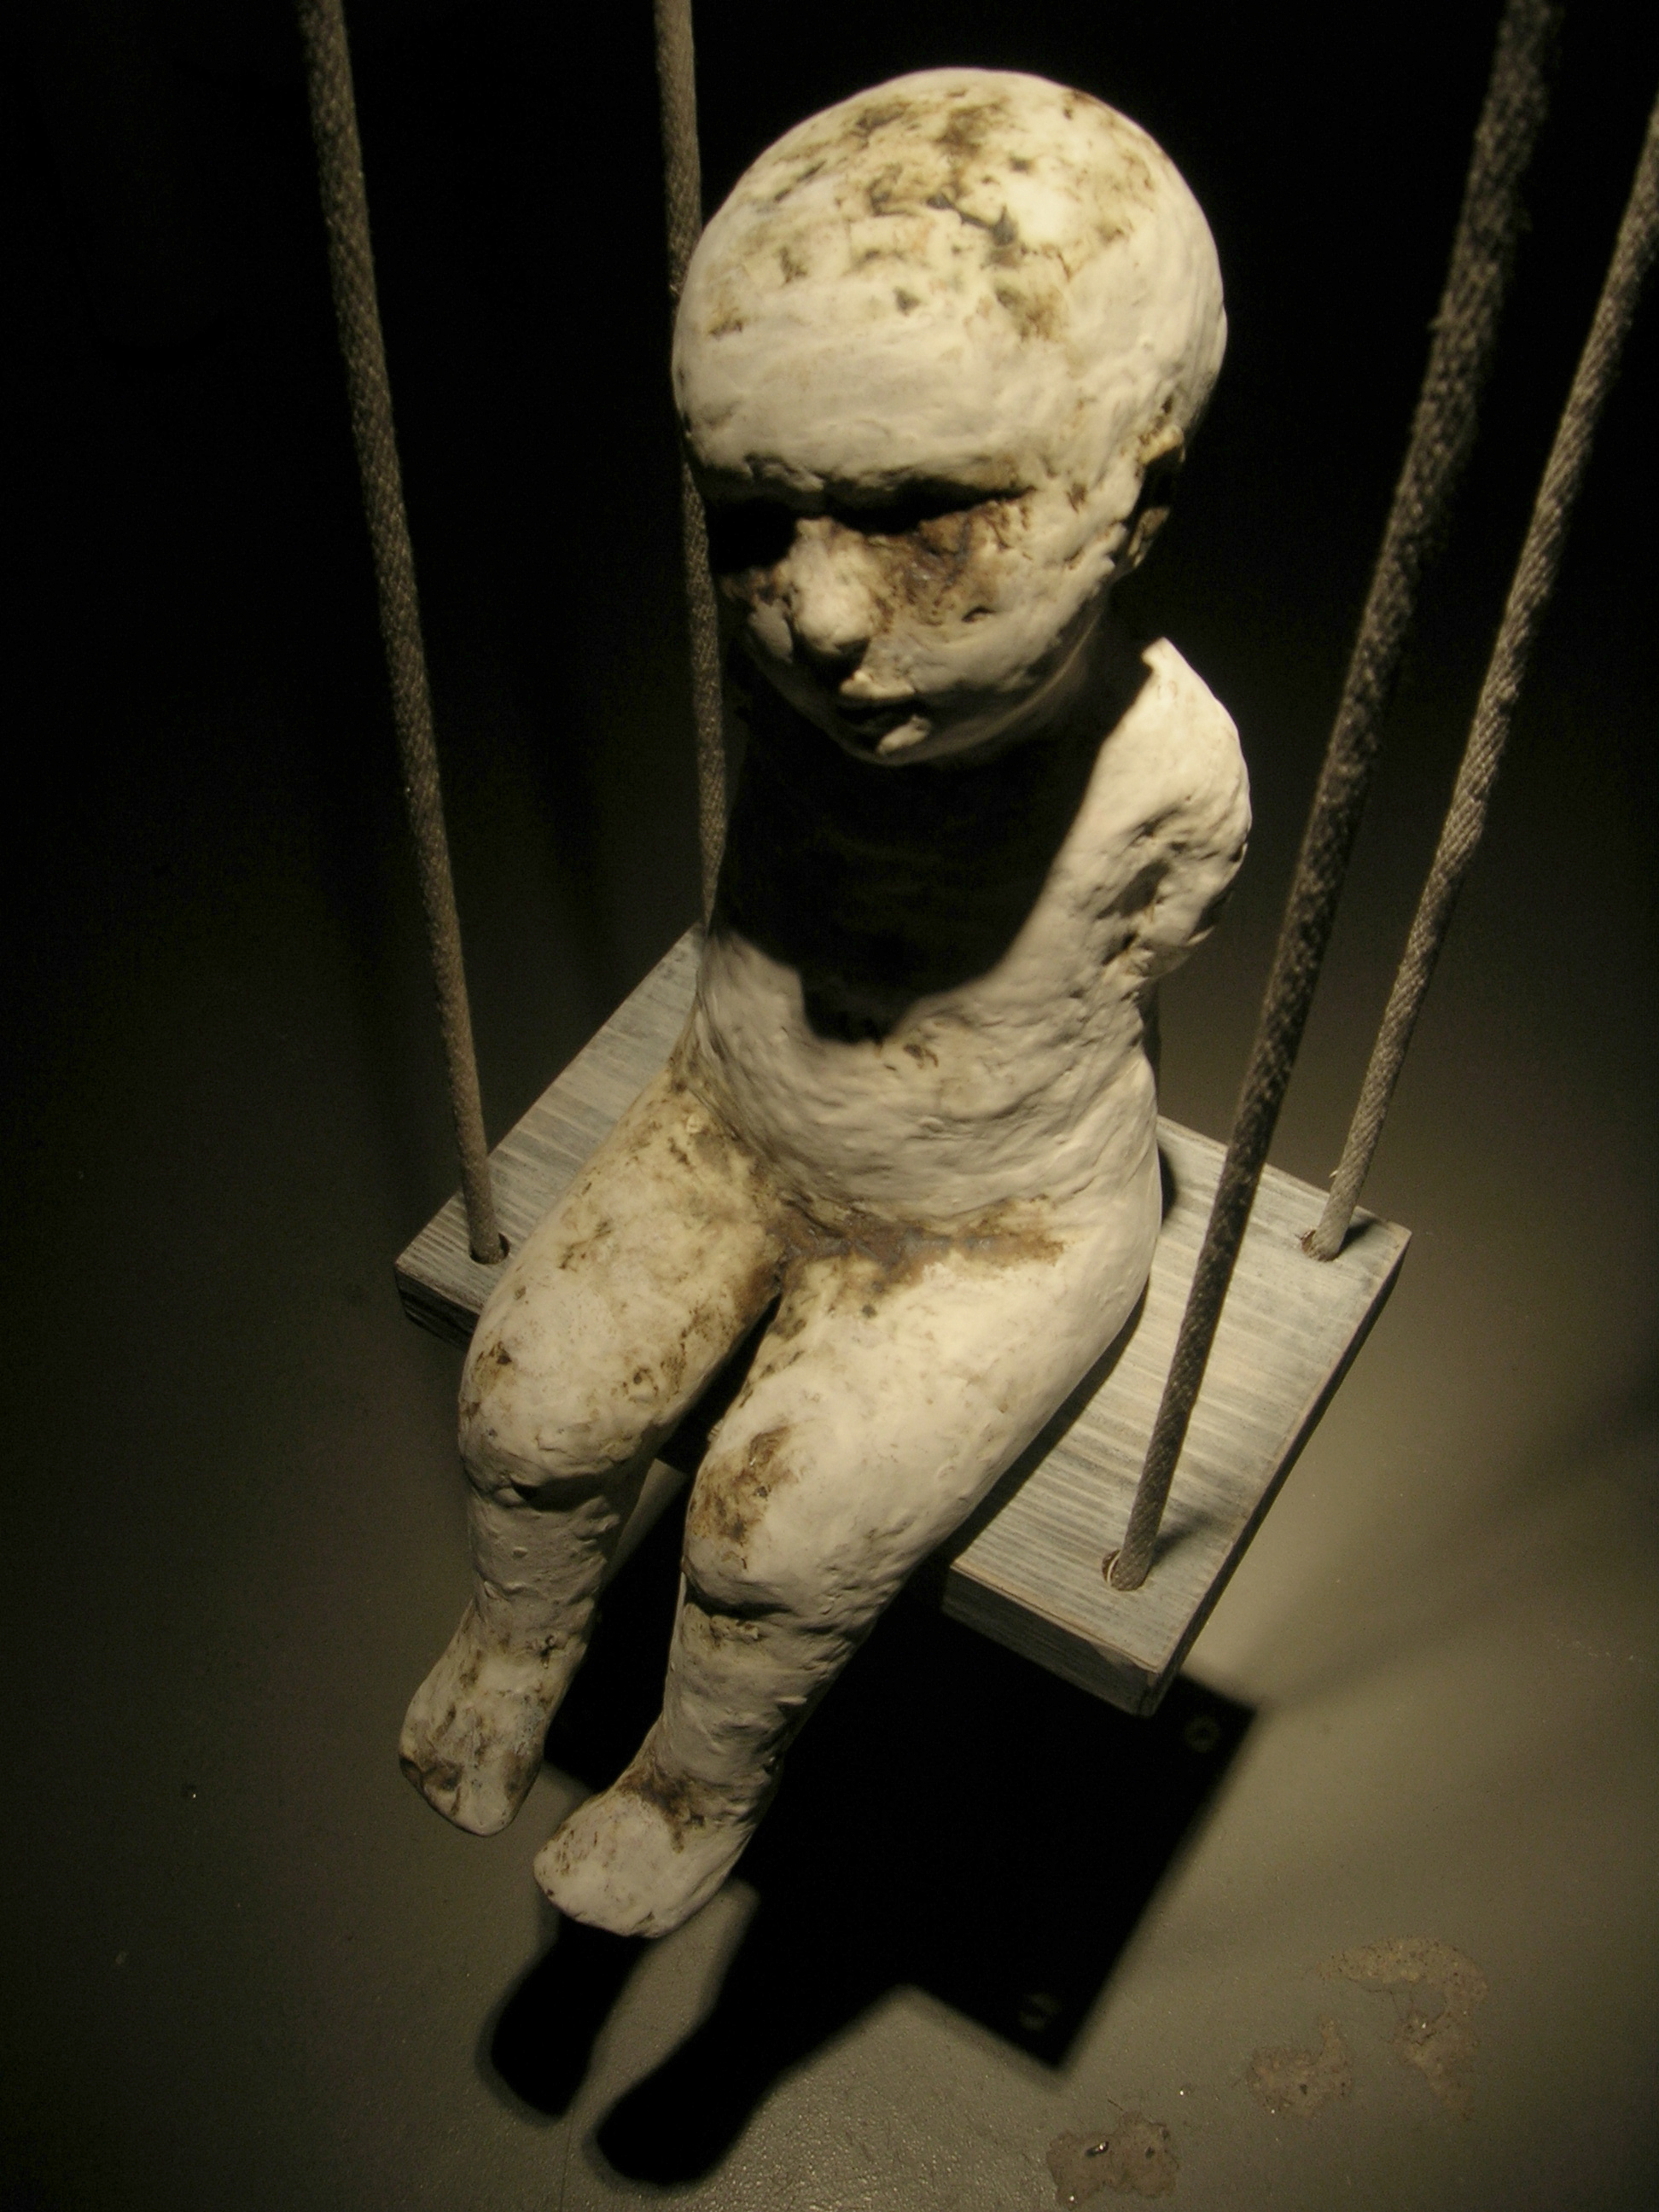 Falling Rope of Silence, 2005, Ceramic, rope, and wood.